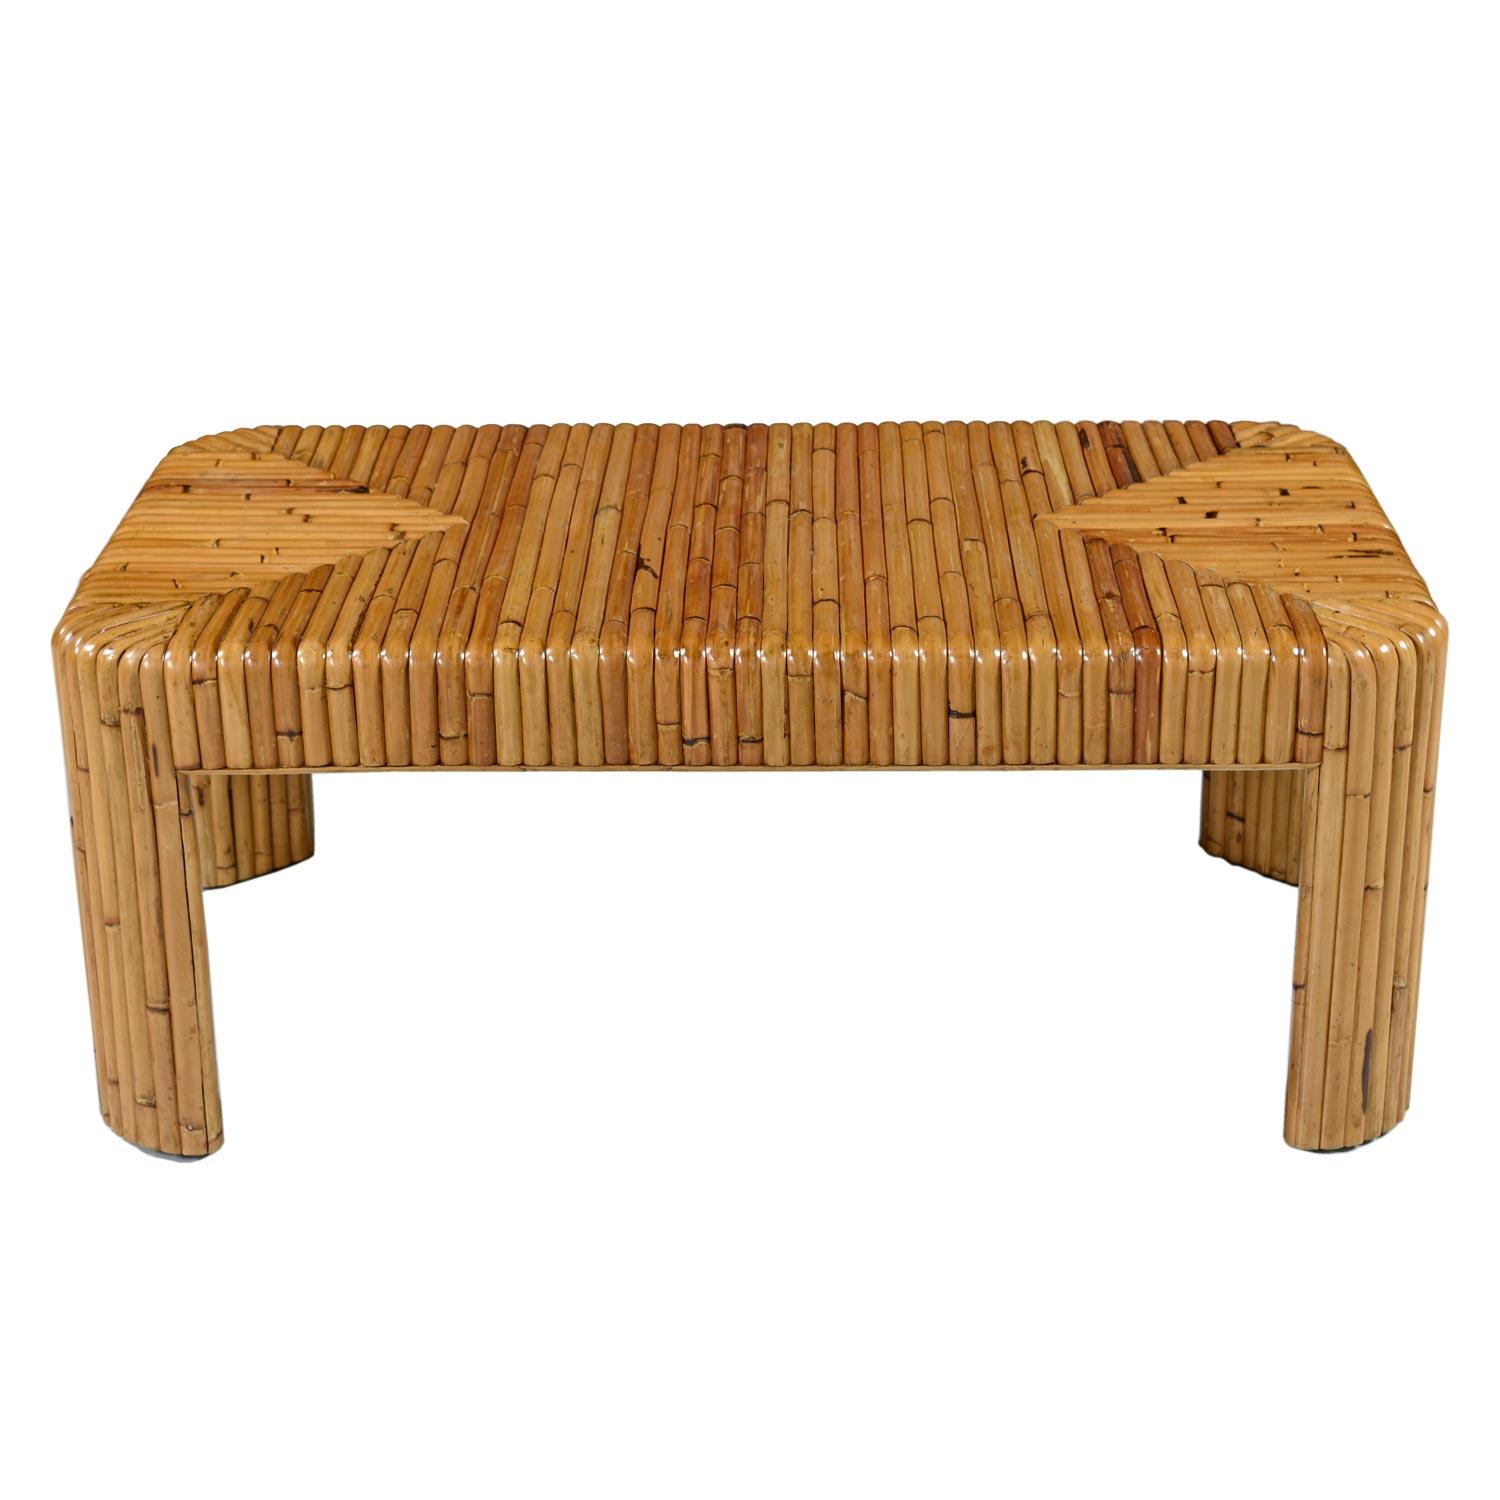 The earthy reed motif is on trend, blending well with Bohemian, contemporary and modern rustic. Rattan slats intersecting in geometric harmony. The sustainable material composing this coffee table emits a warm elegance.